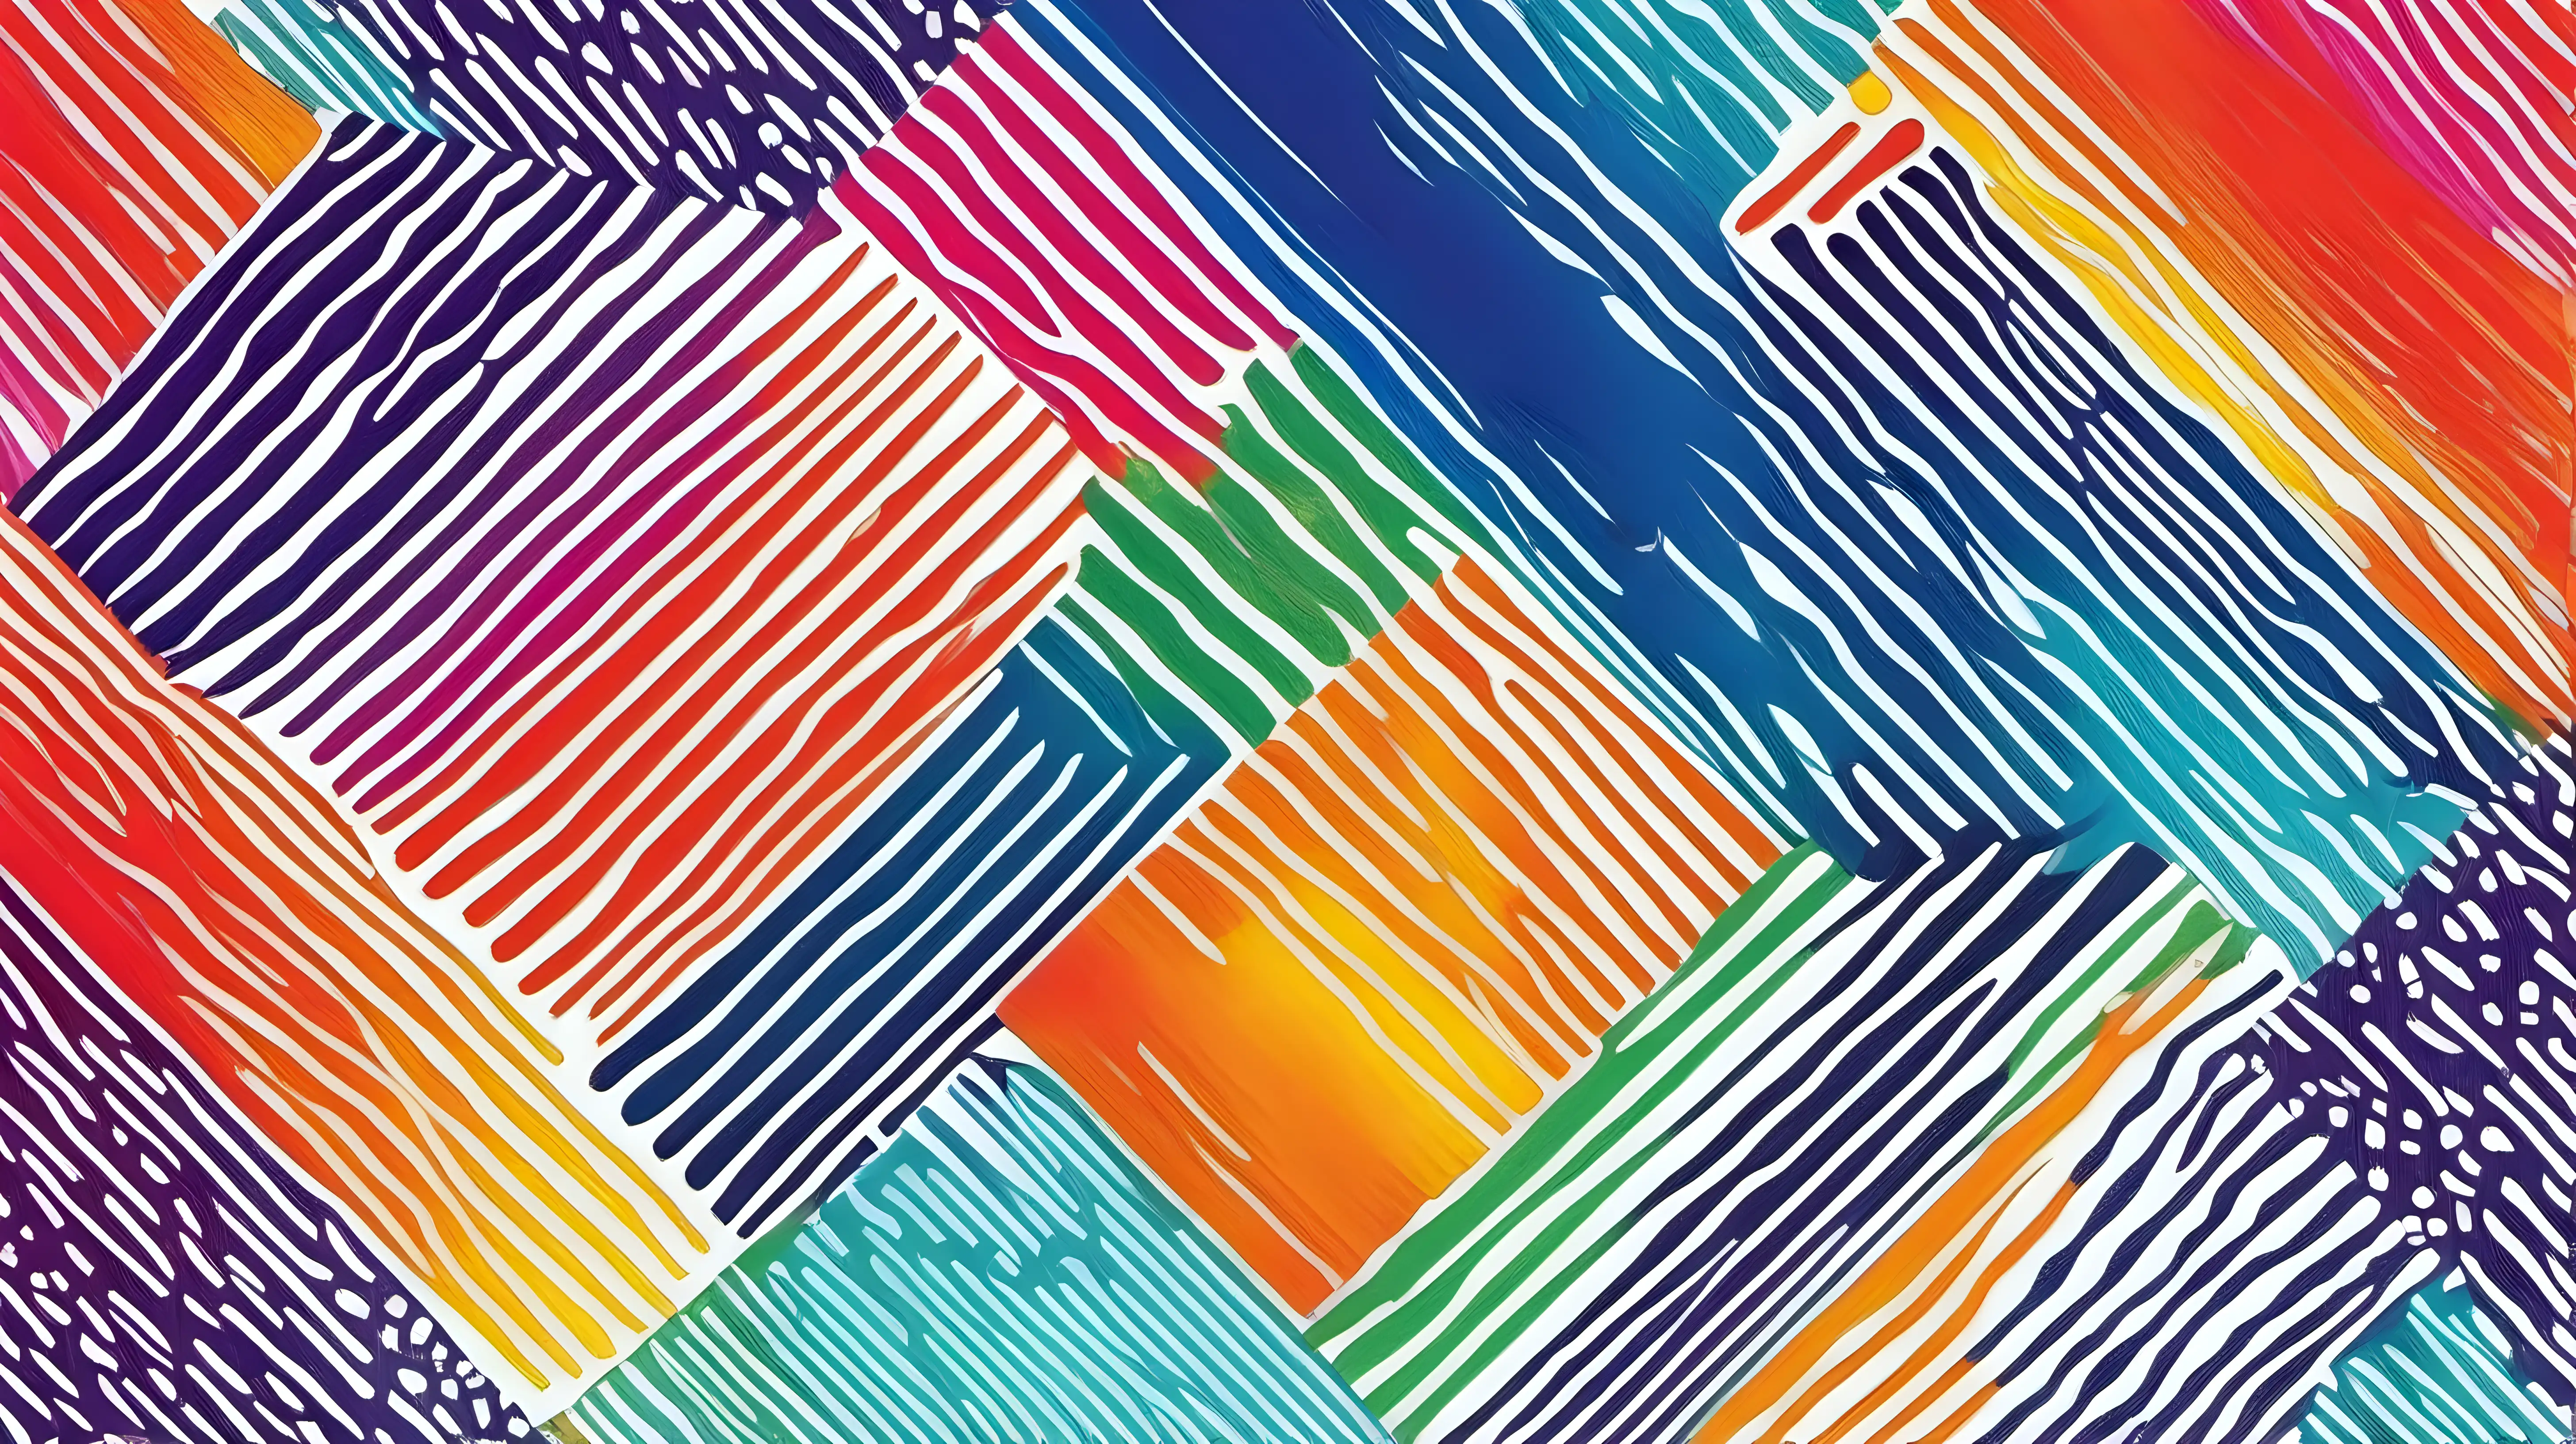 Vibrant Colorful Abstract Pattern on White Background